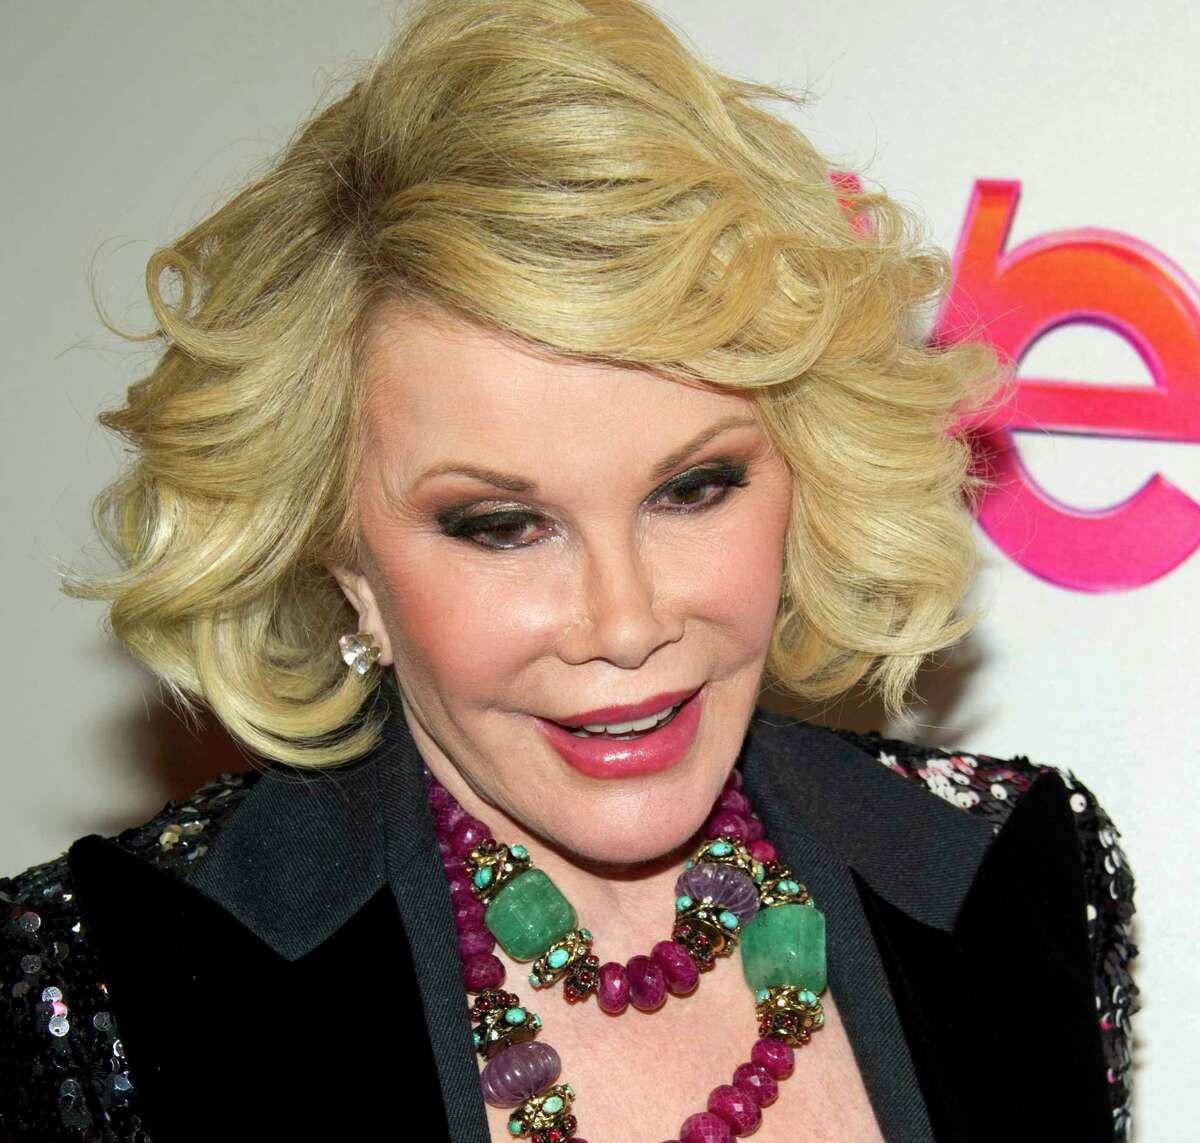 FILE - In this Jan. 19, 2012, file photo, Joan Rivers attends a screening of the Season 2 premiere of WE TV's "Joan & Melissa: Joan Knows Best?" in New York. Two police officials say Rivers has been rushed in cardiac arrest from a doctorís office to a New York City hospital, Thursday, Aug. 28, 2014. (AP Photo/Charles Sykes, File)